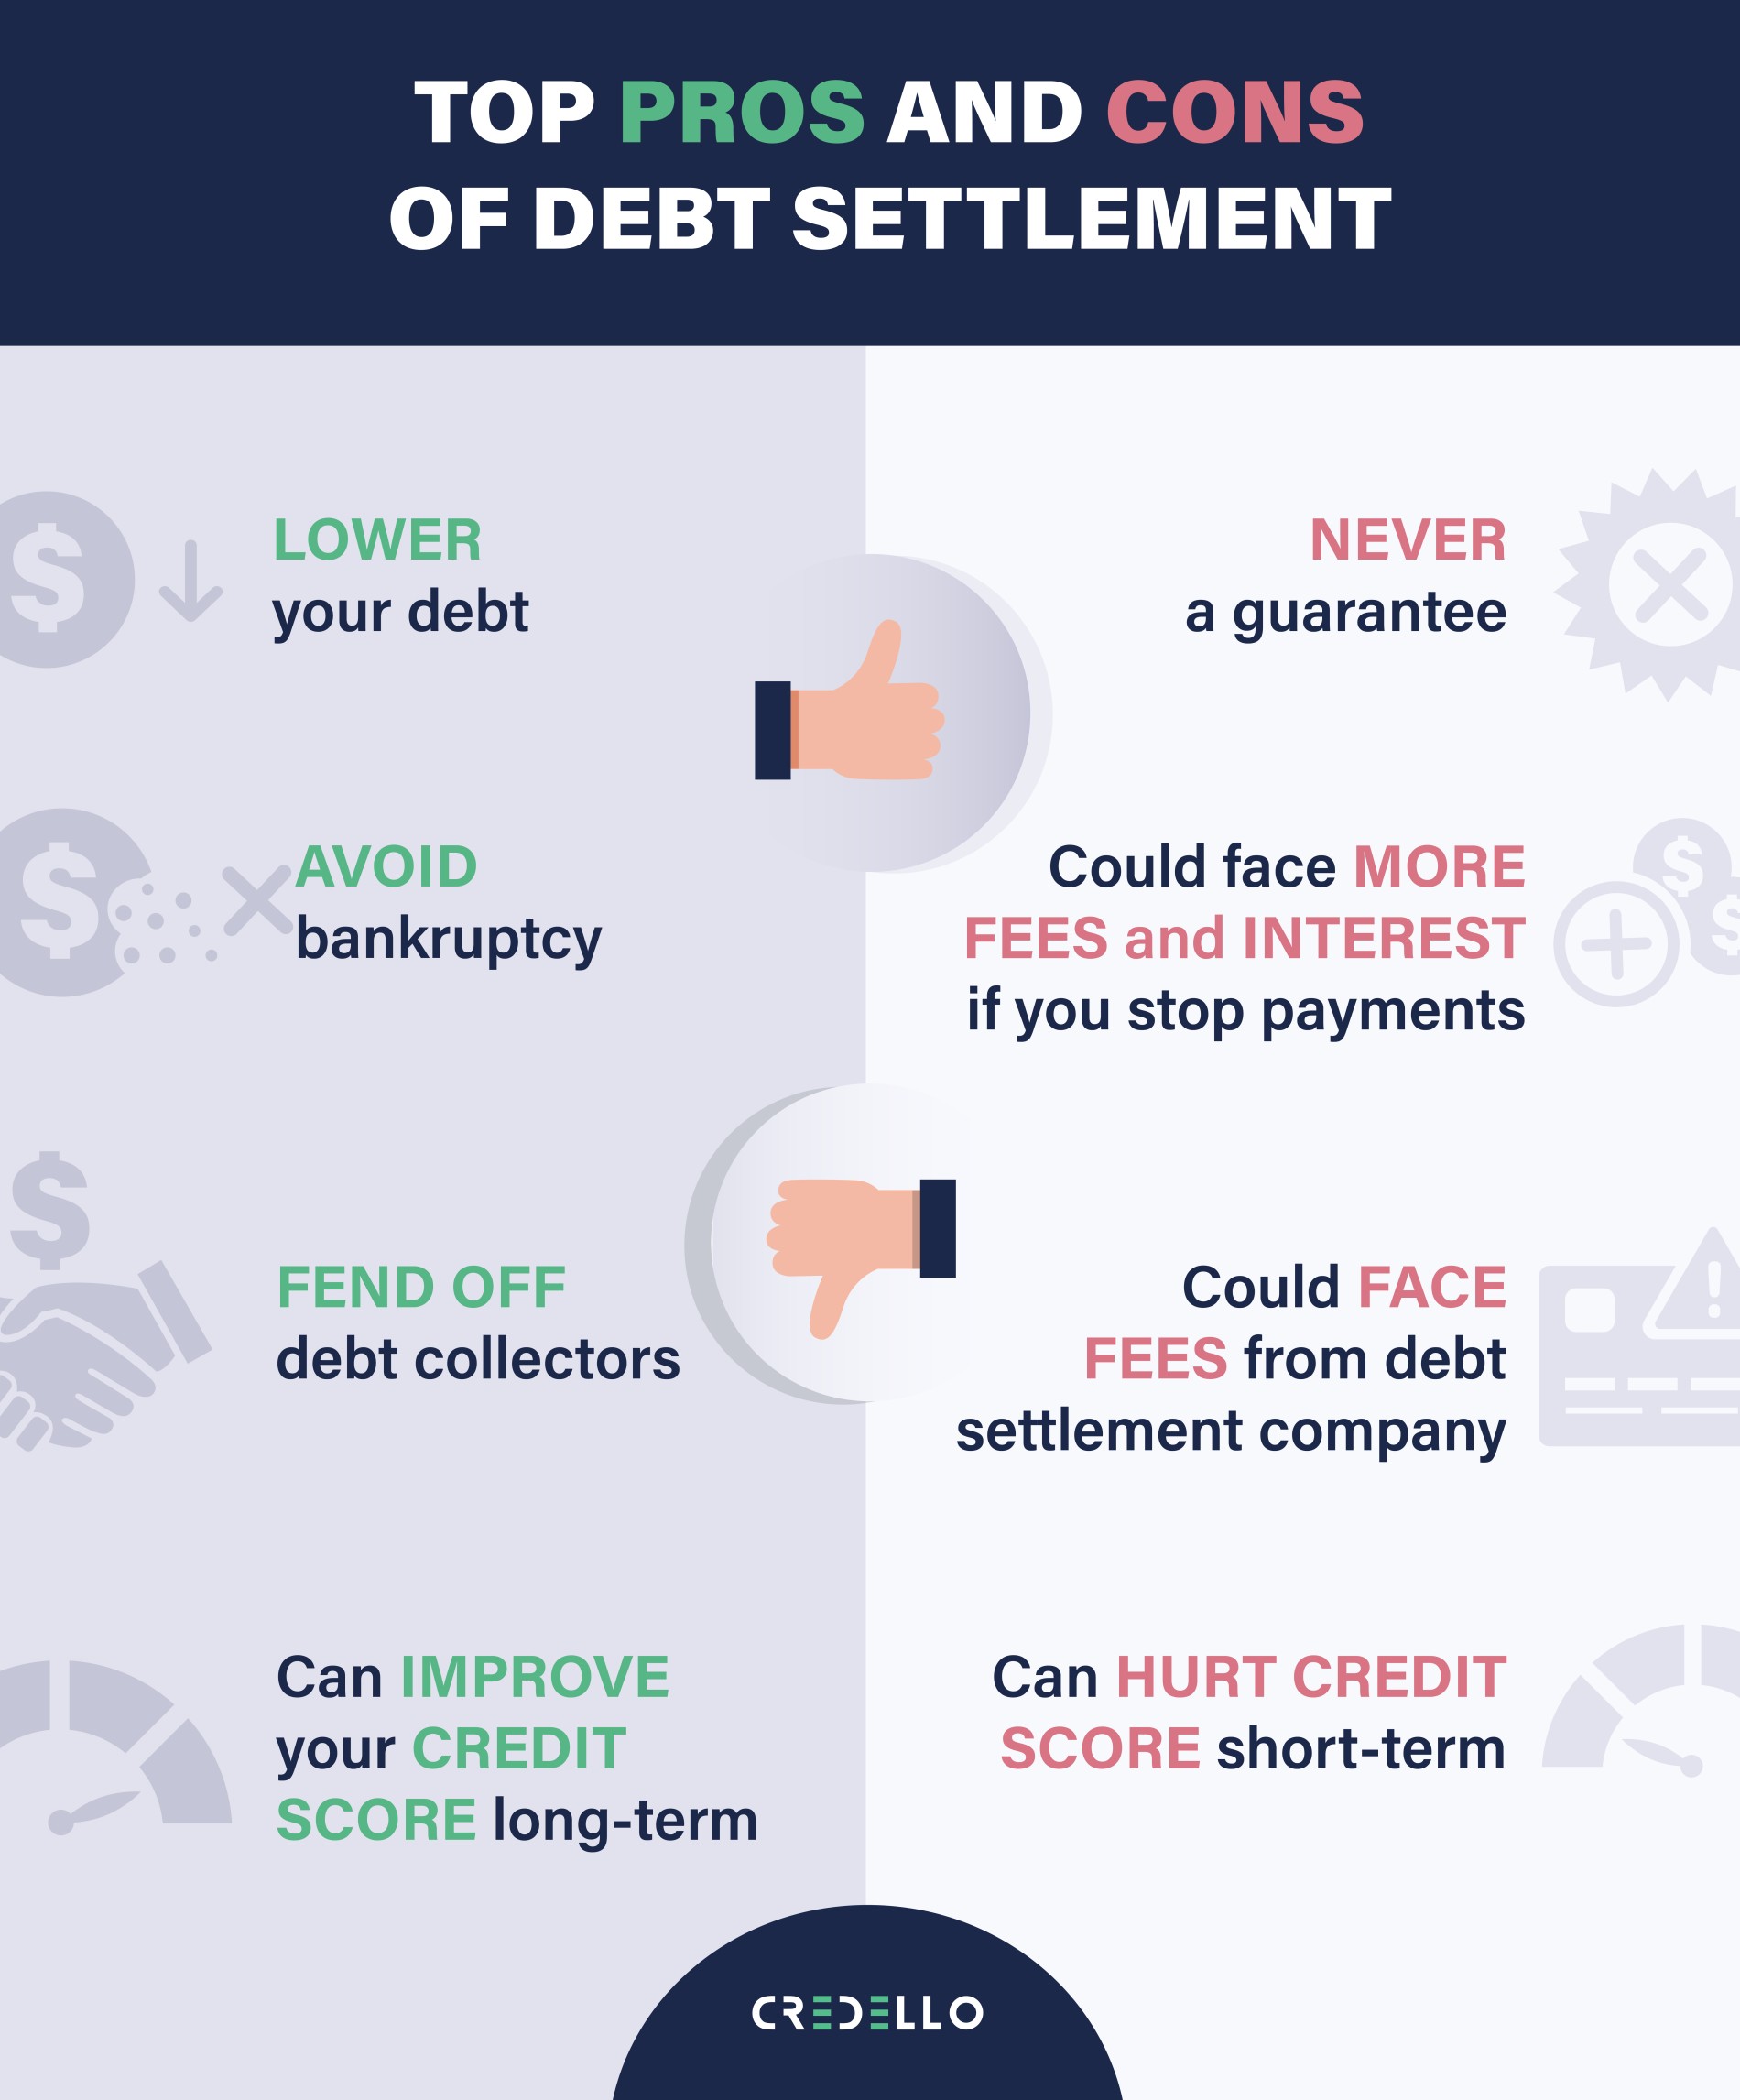 The pros and cons of debt settlement to help you decide if debt settlement is worth it?